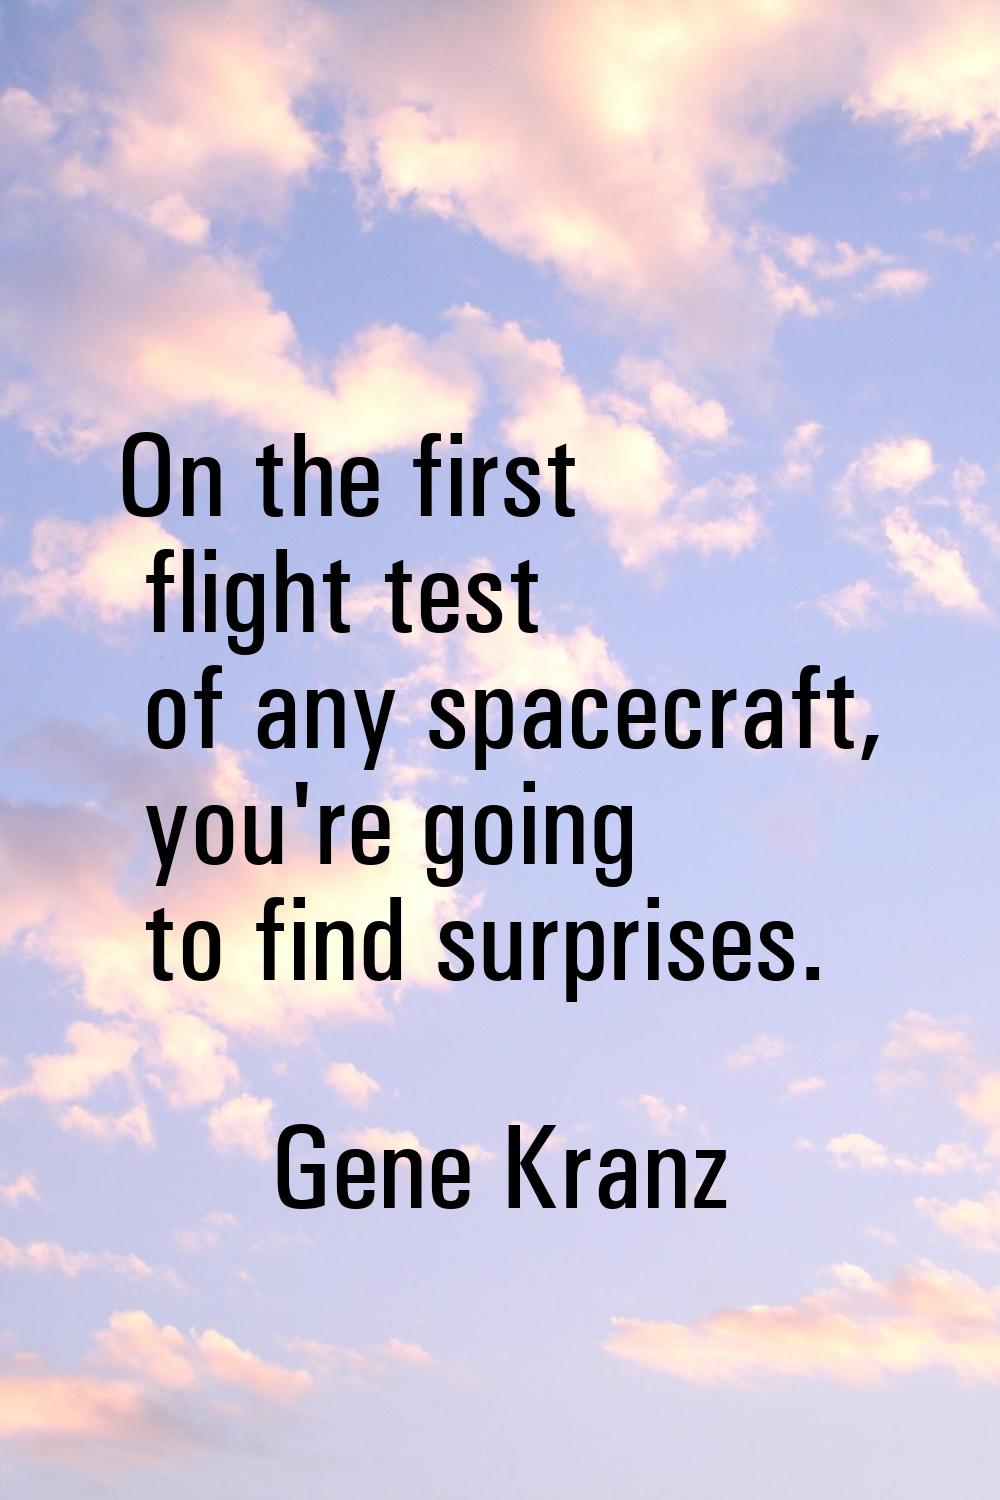 On the first flight test of any spacecraft, you're going to find surprises.